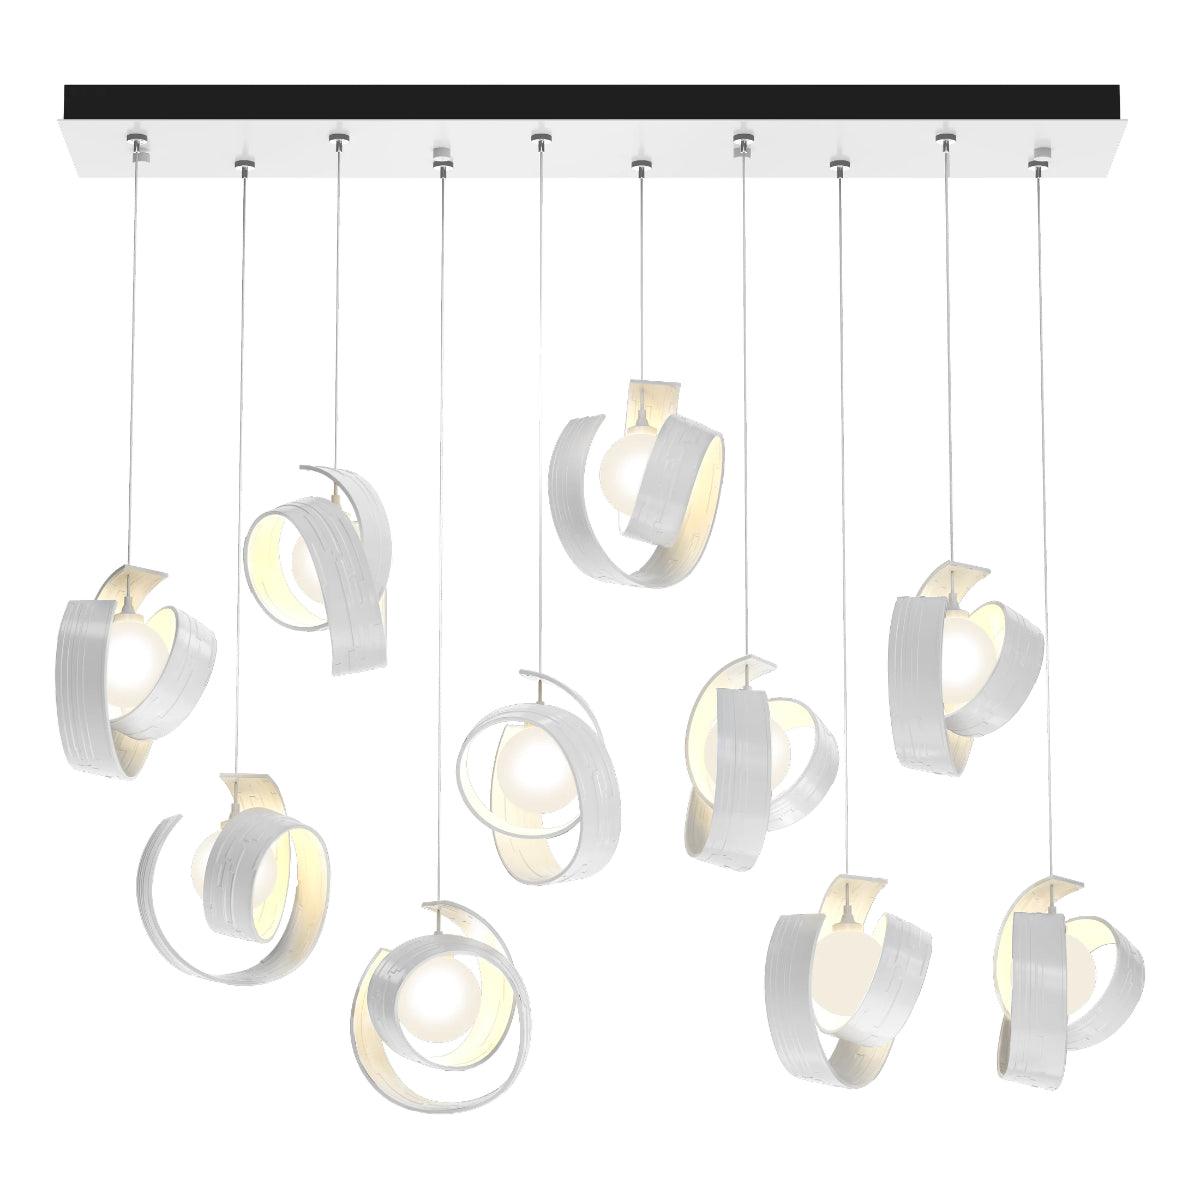 Riza 47 in. 10 lights Linear Pendant Light with Standard Height